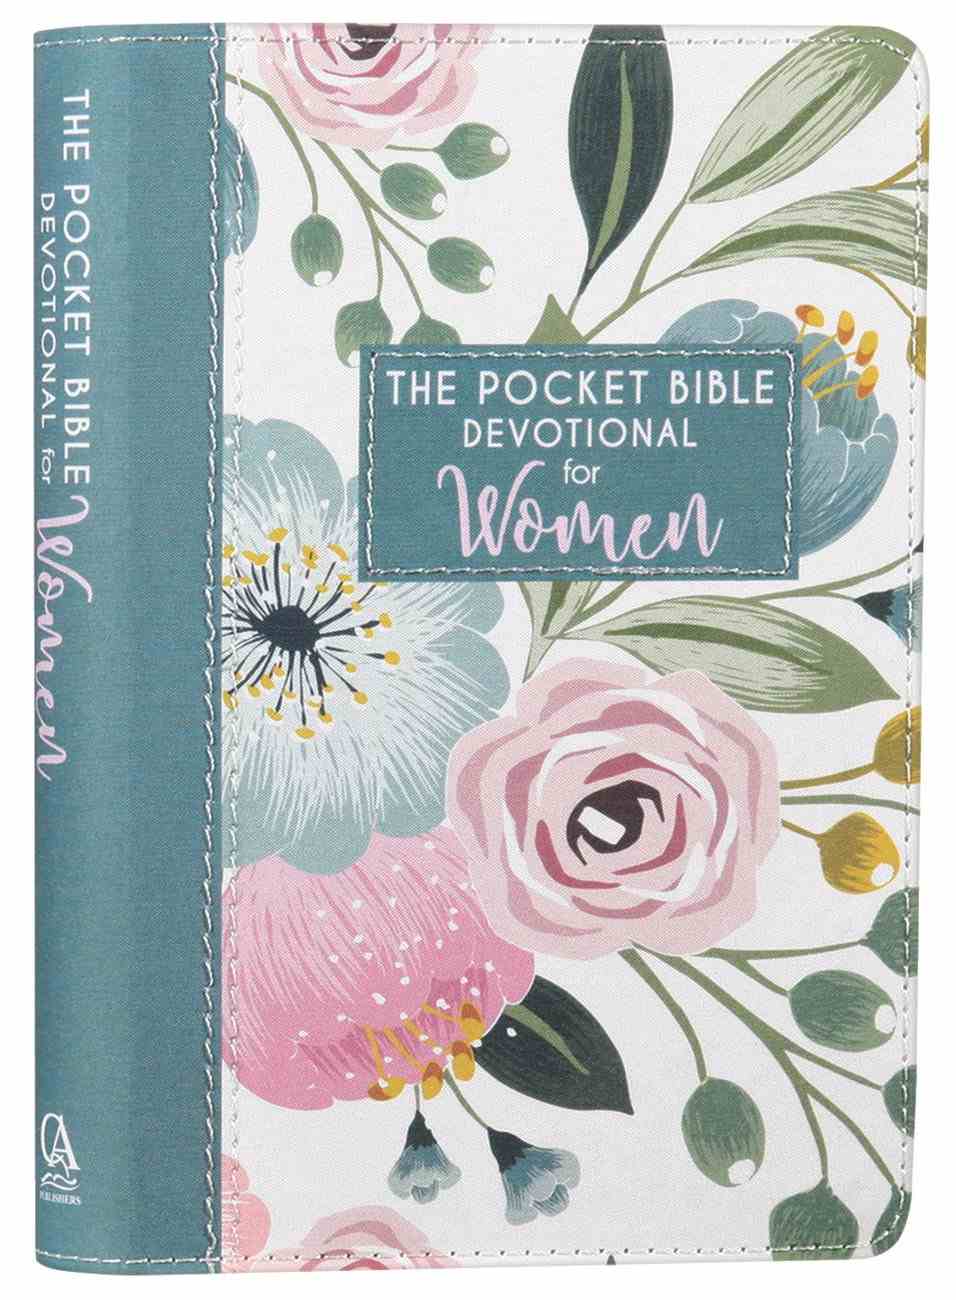 Pocket Bible Devotional For Women (365 Daily Devotions Series) by Norma